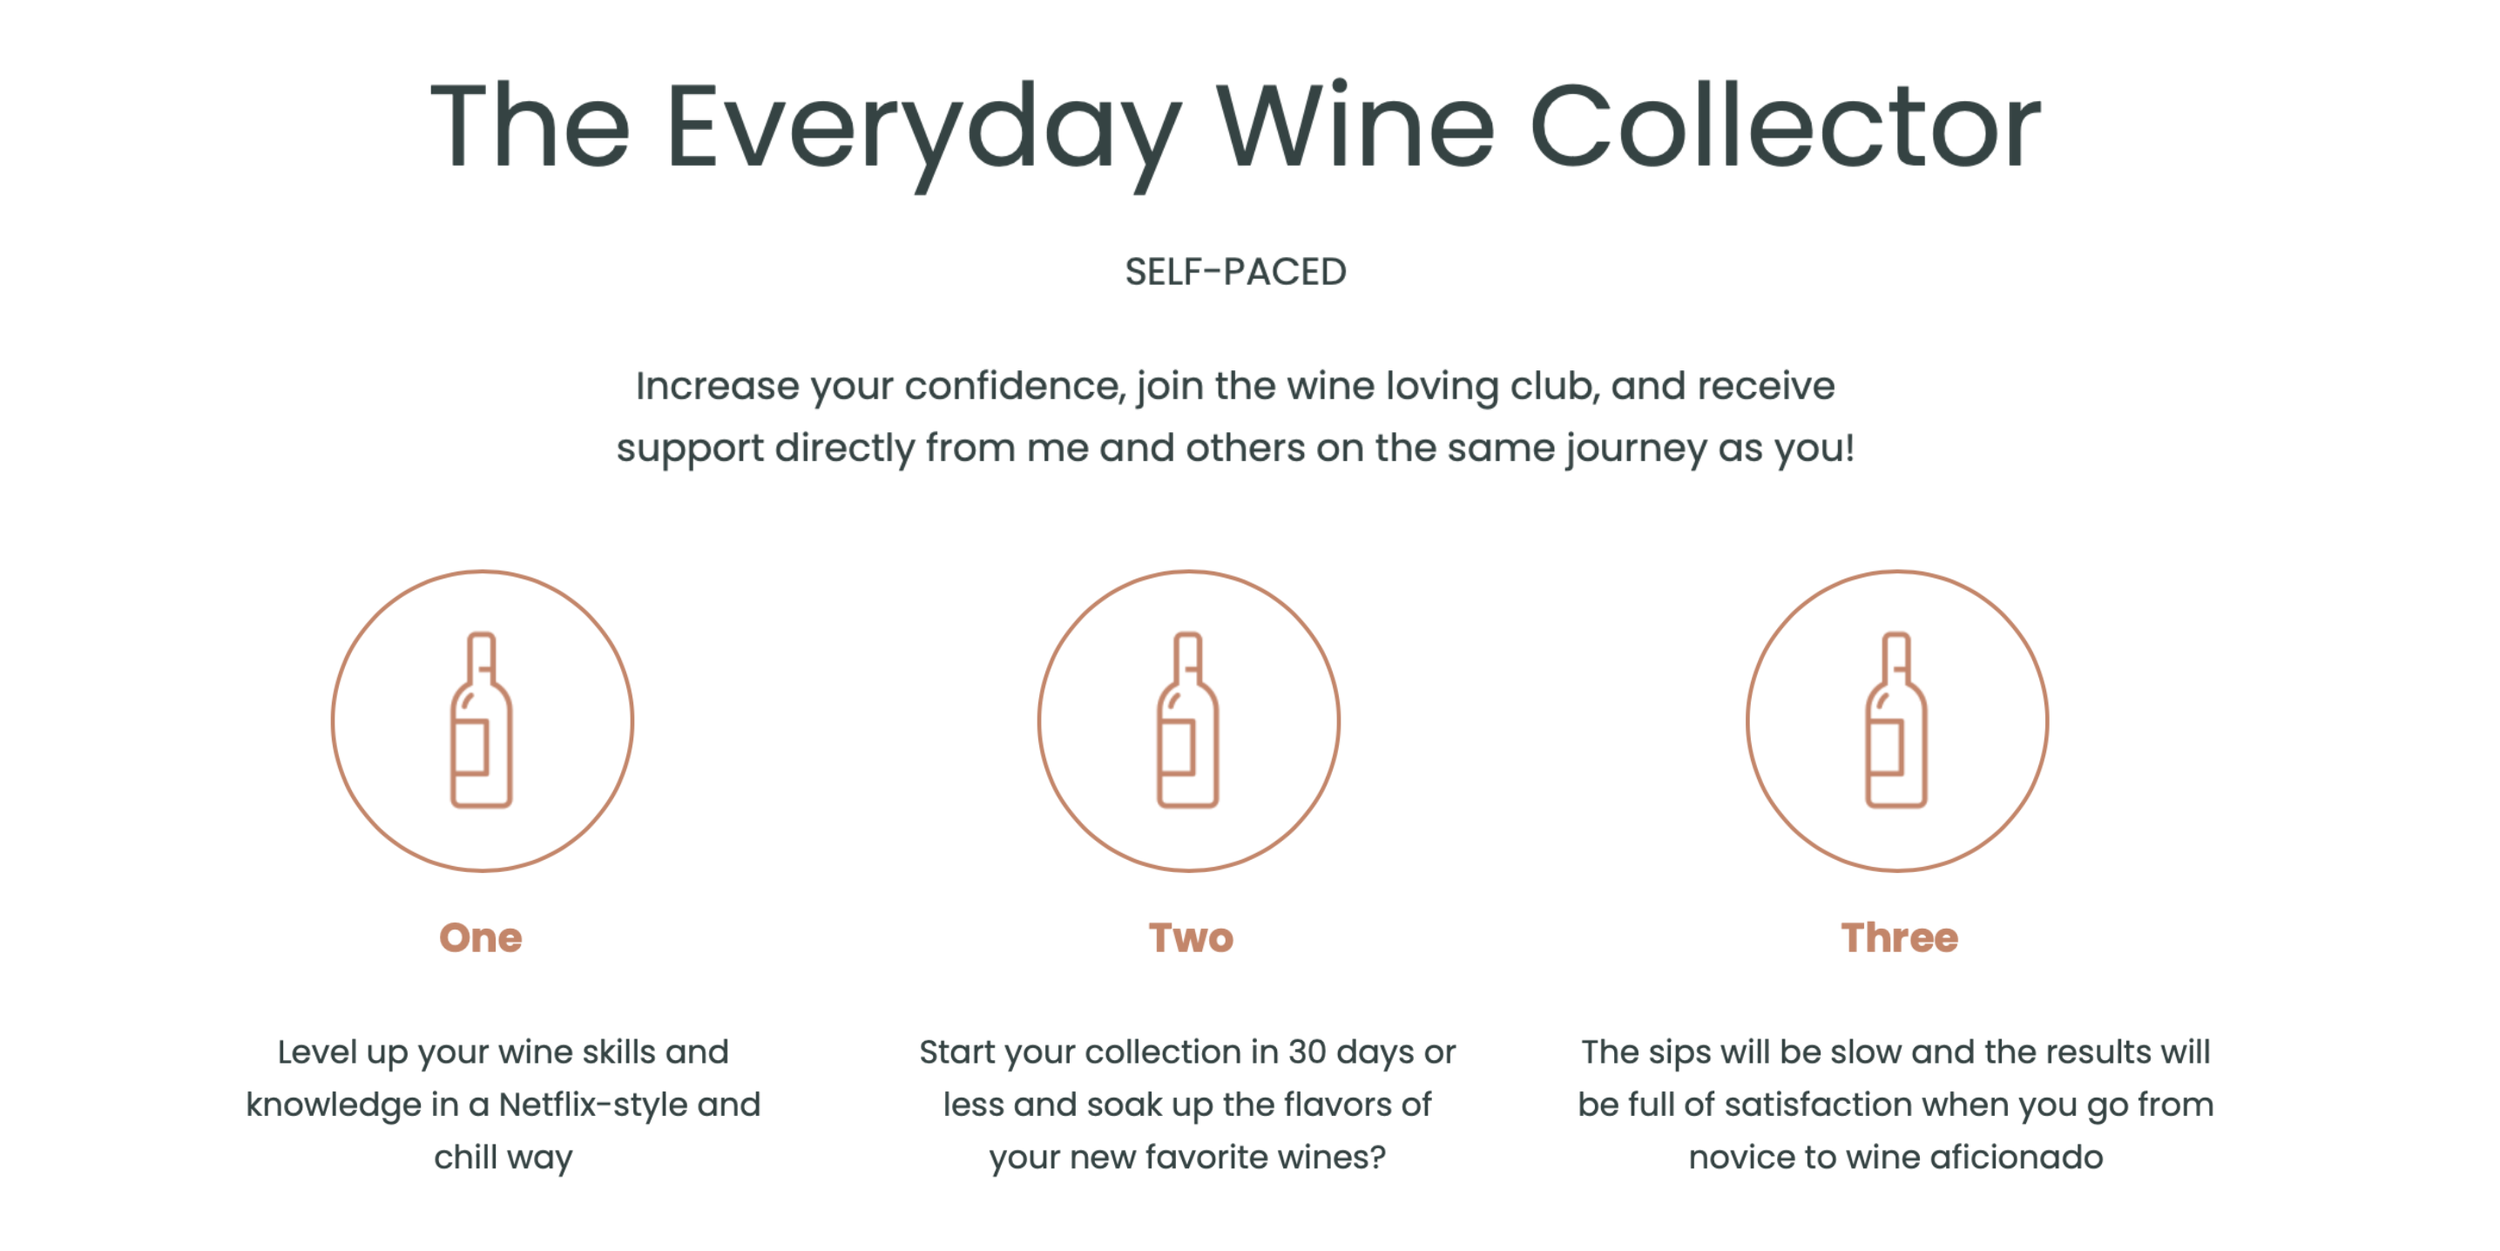 The everyday wine collector course